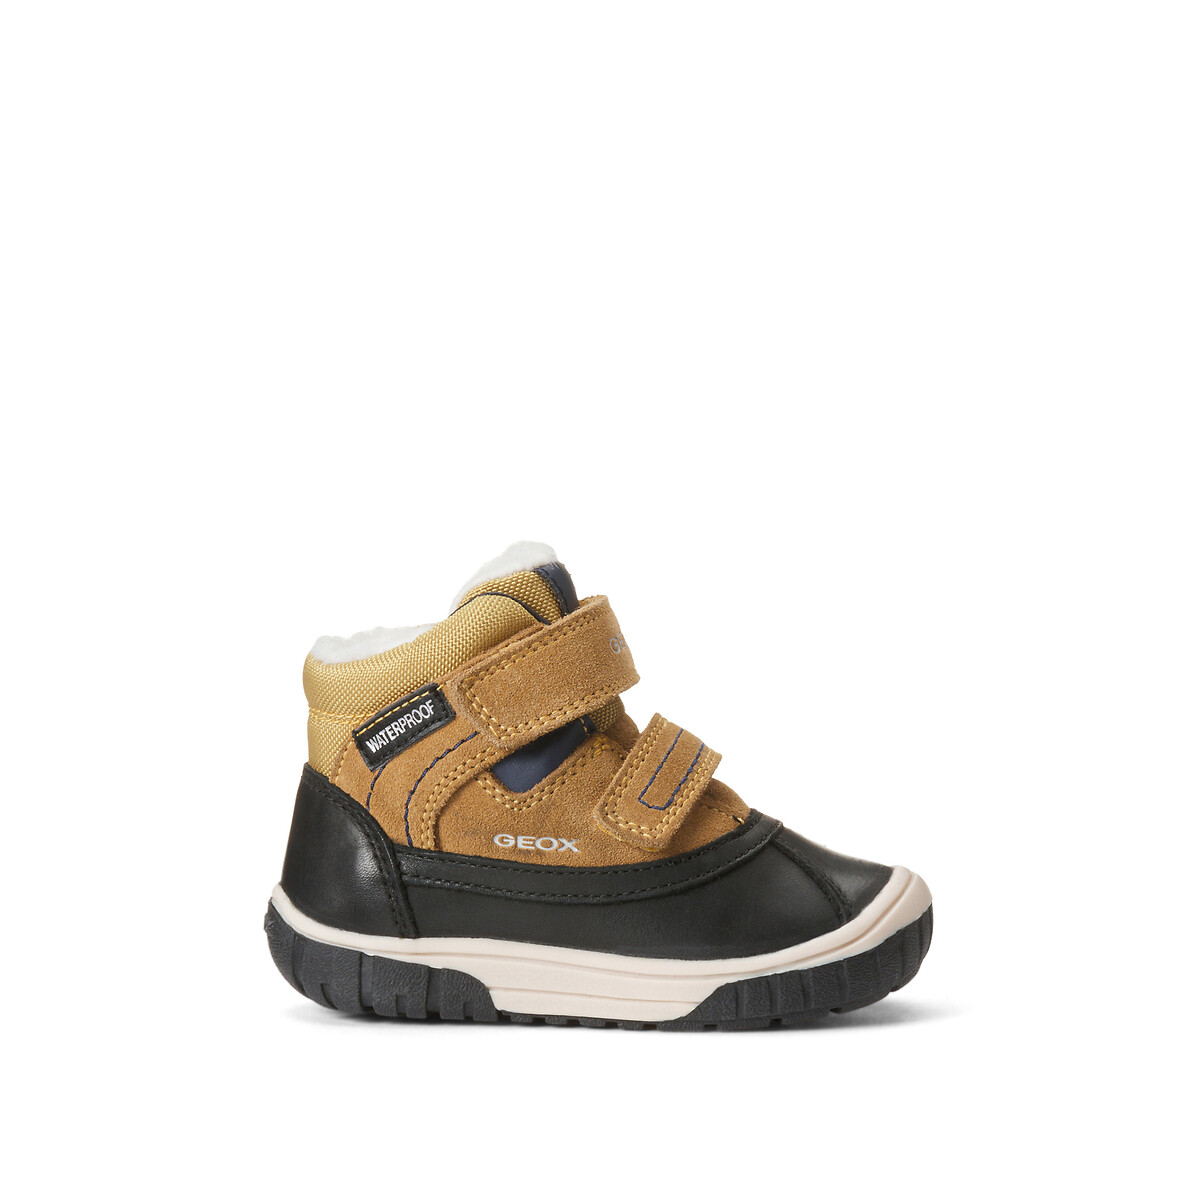 Image of Kids Omar Waterproof High Top Trainers in Leather with Touch 'n' Close Fastening